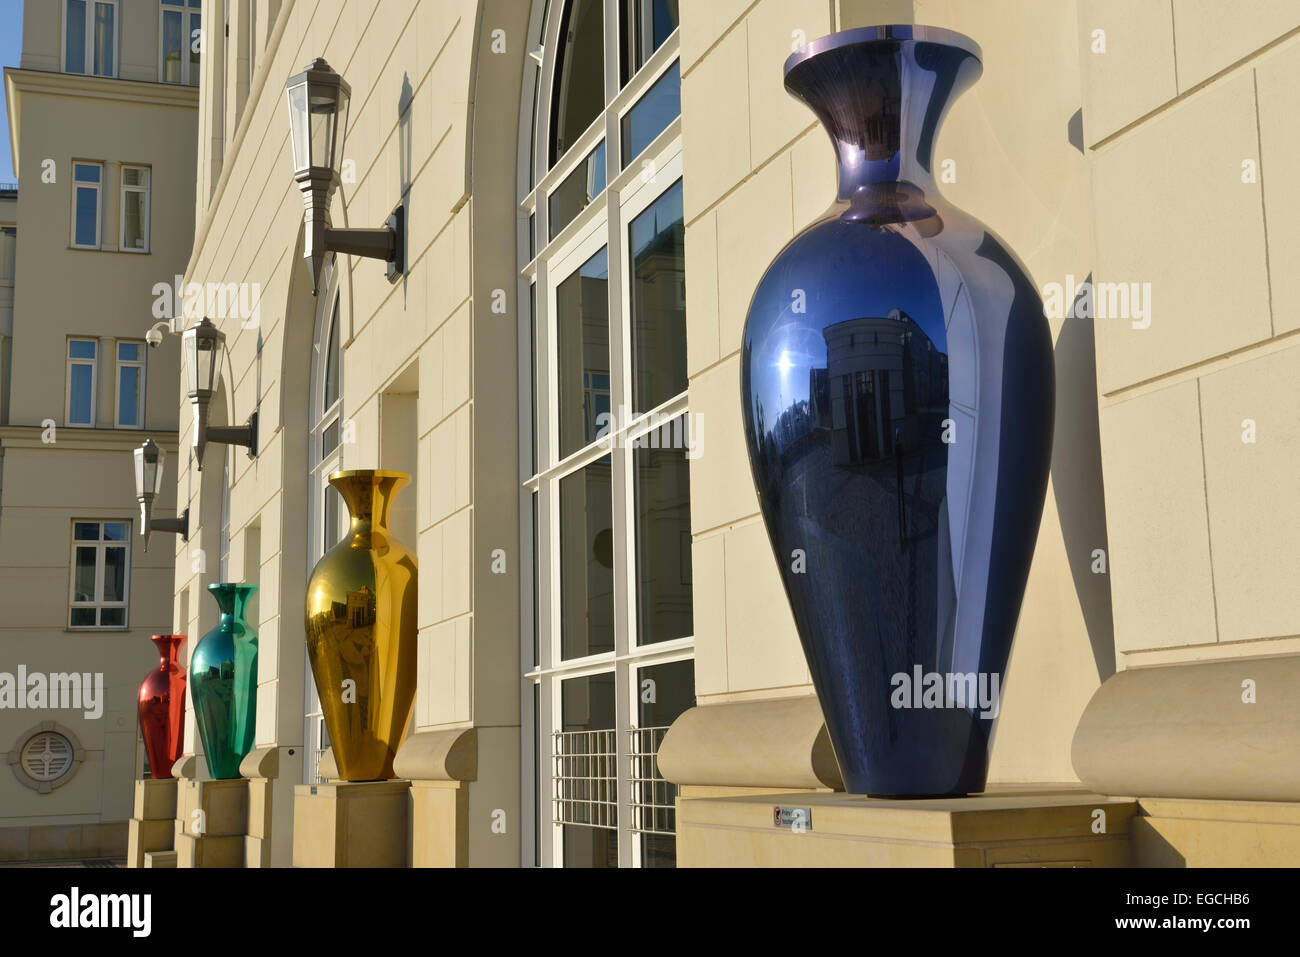 Sculptures of vases in the courtyard of Cite Judiciaire, City of Luxembourg, Luxembourg Stock Photo